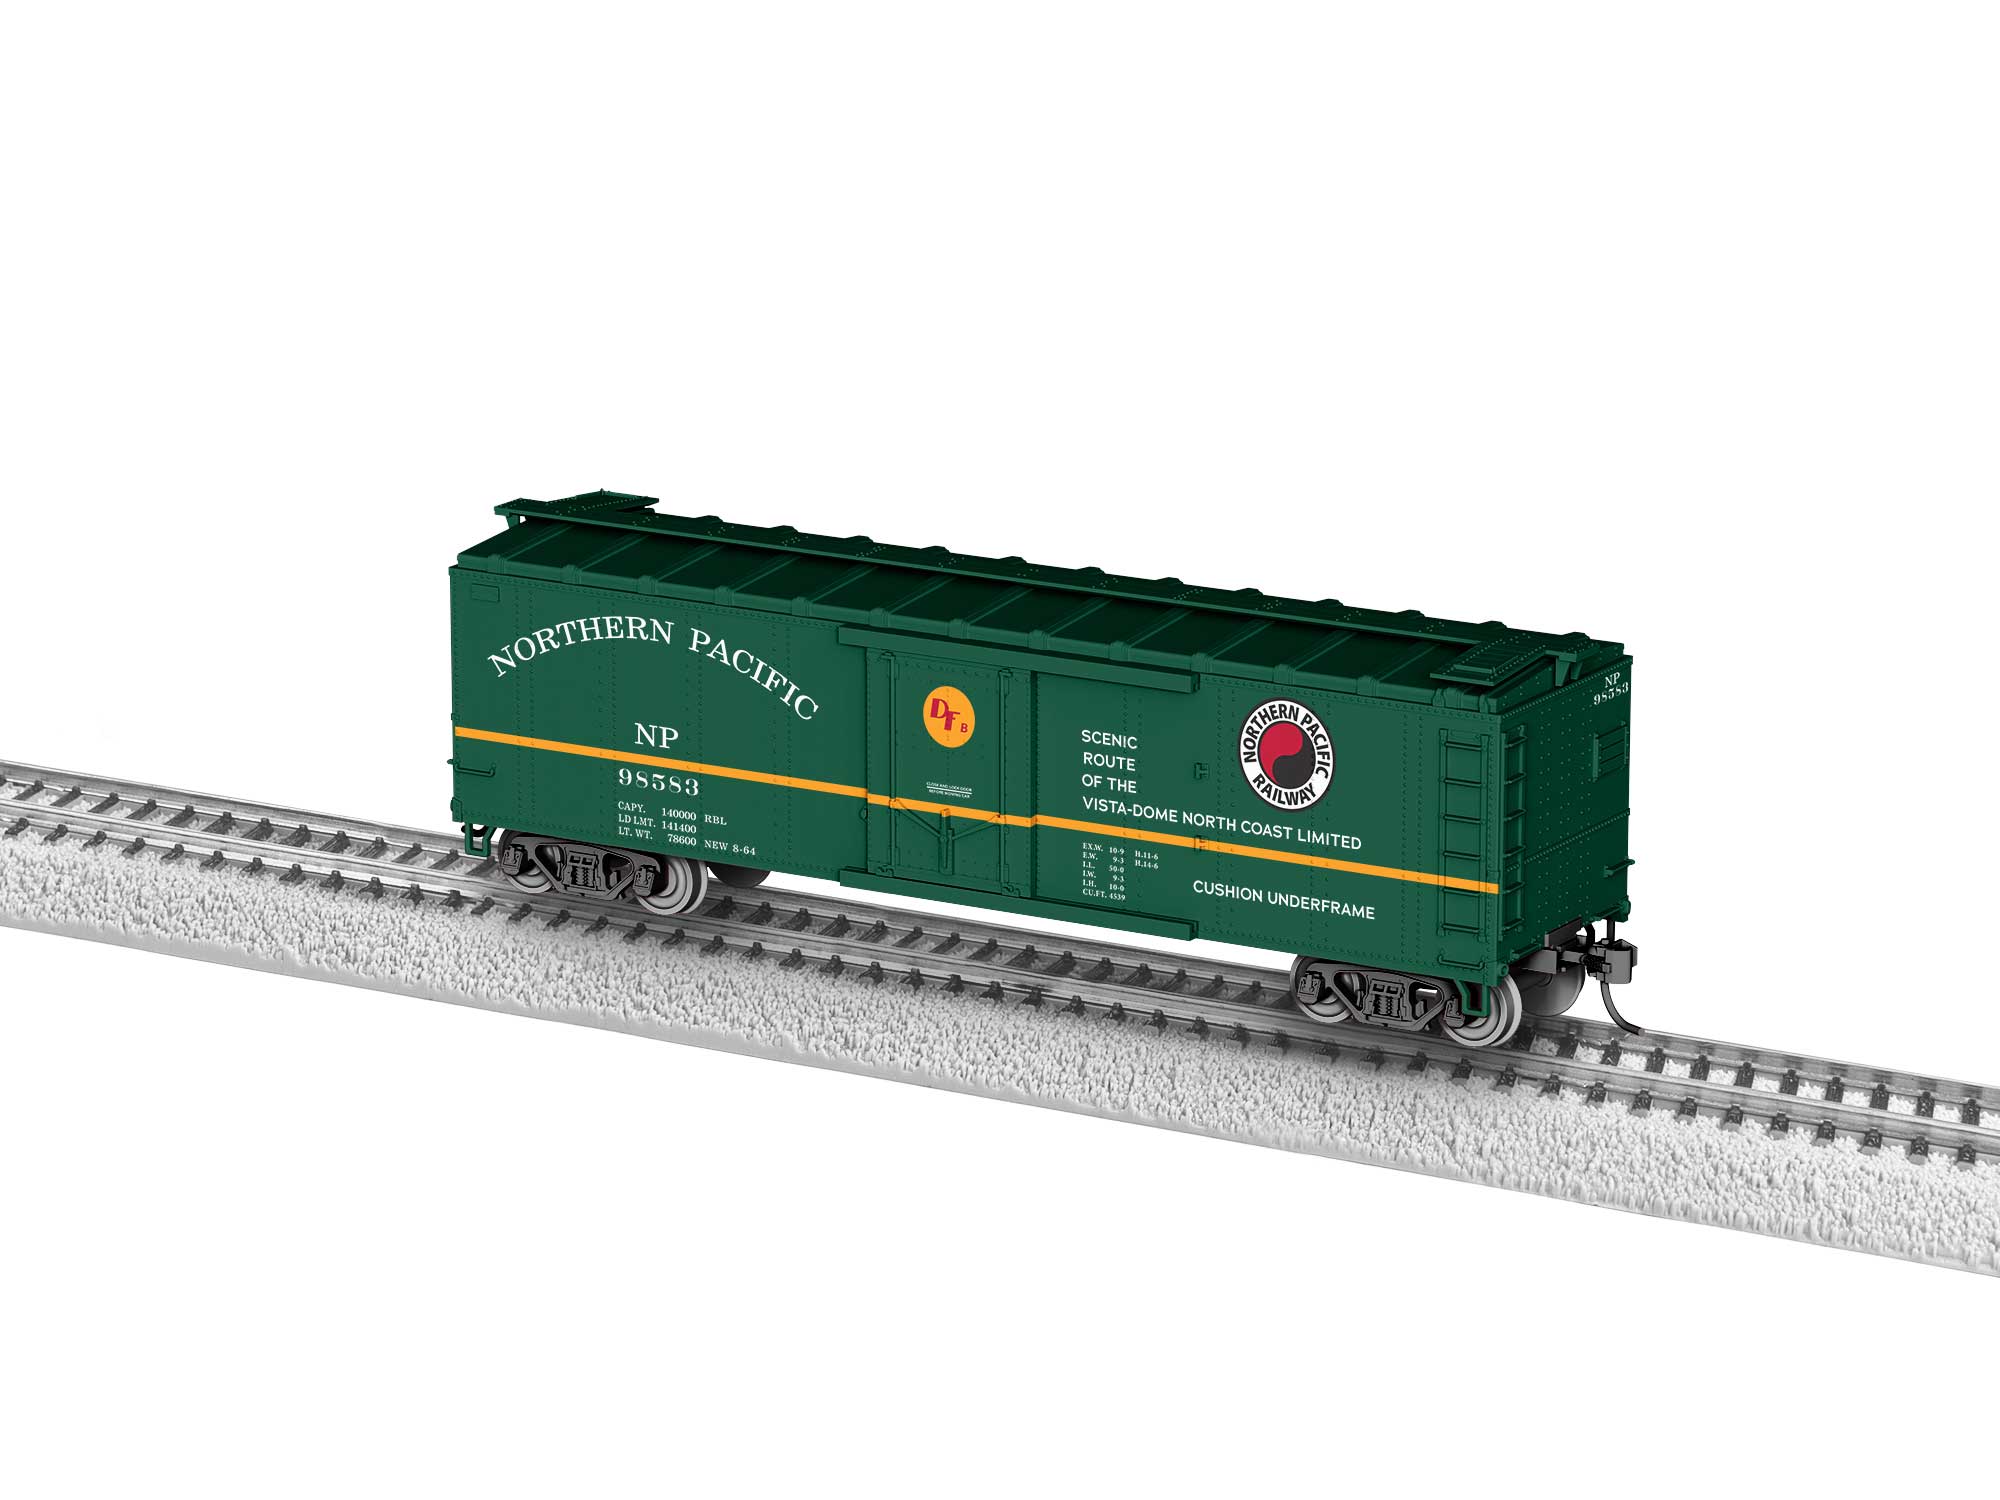 Lionel HO 2454390 - Boxcar "Northern Pacific" #98583